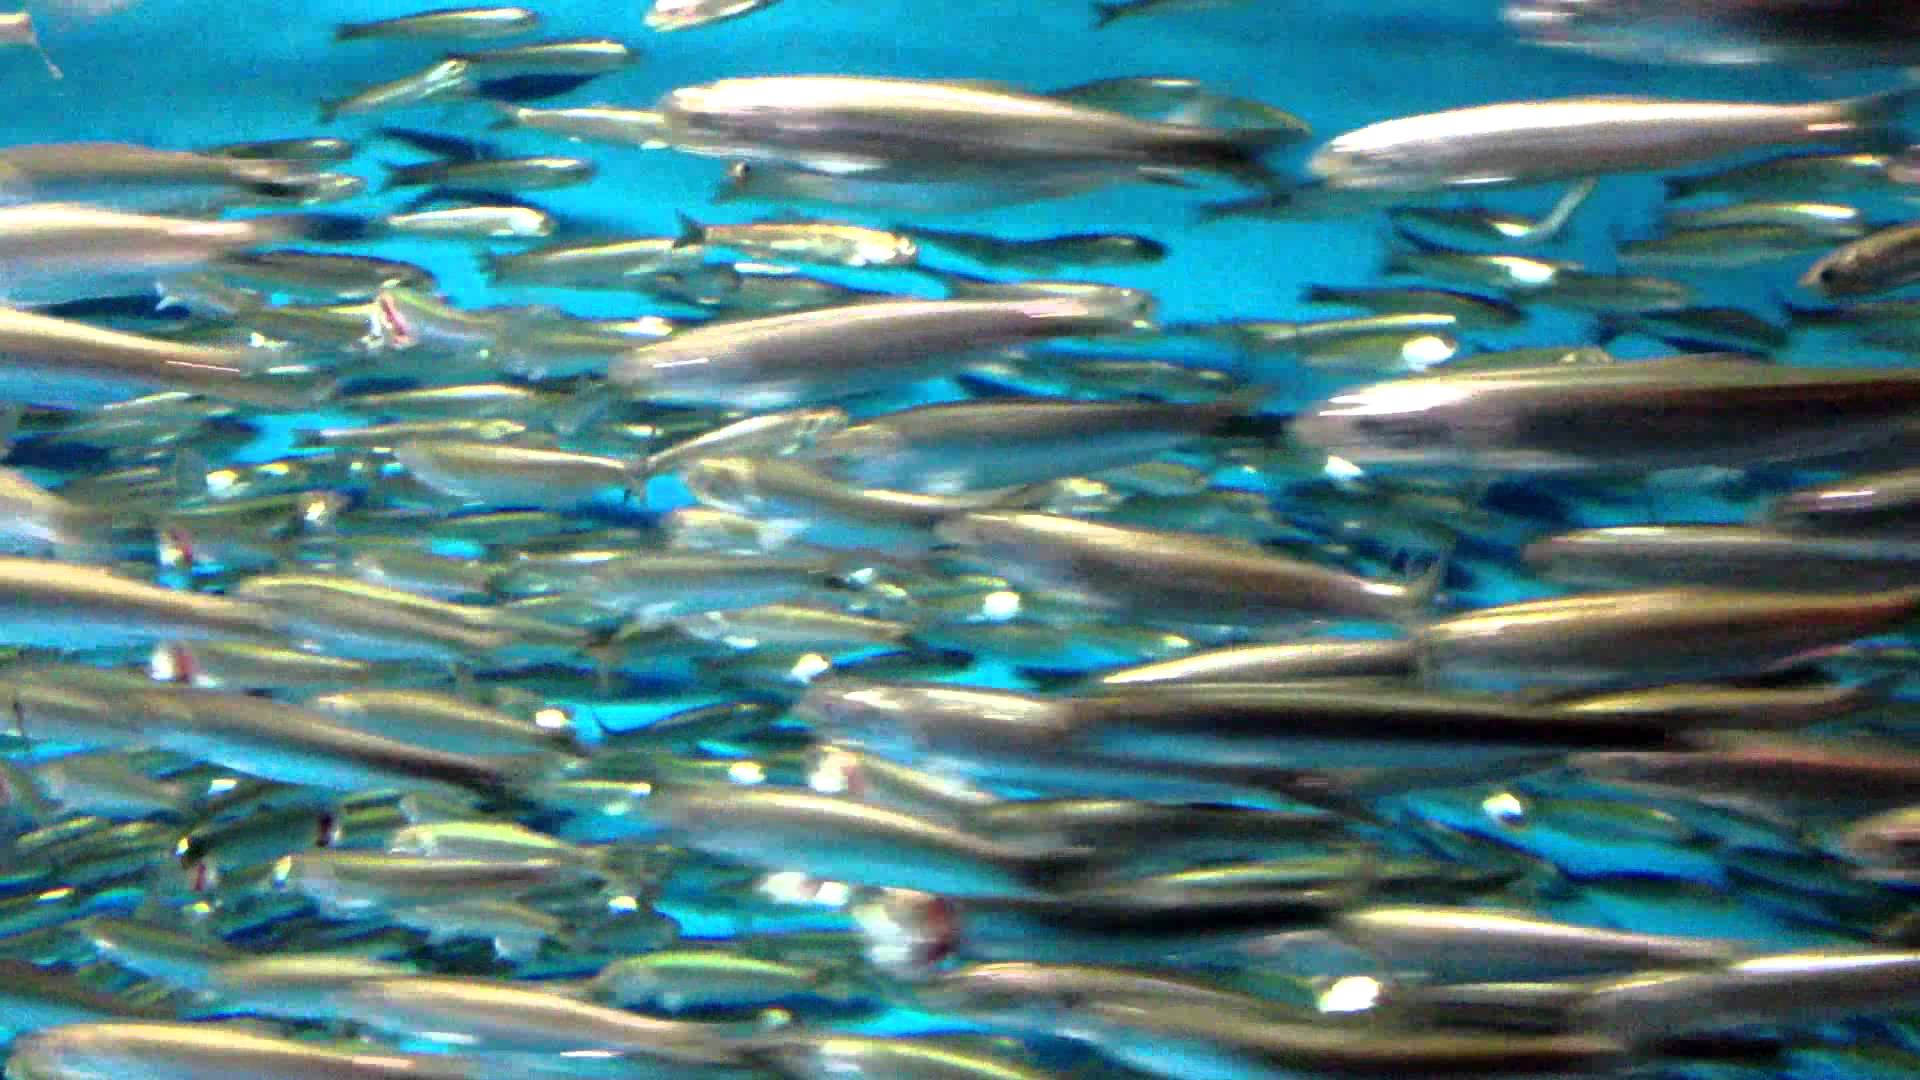 Court Confirms Decision Rejecting Catch Limit for California Anchovy Fishery